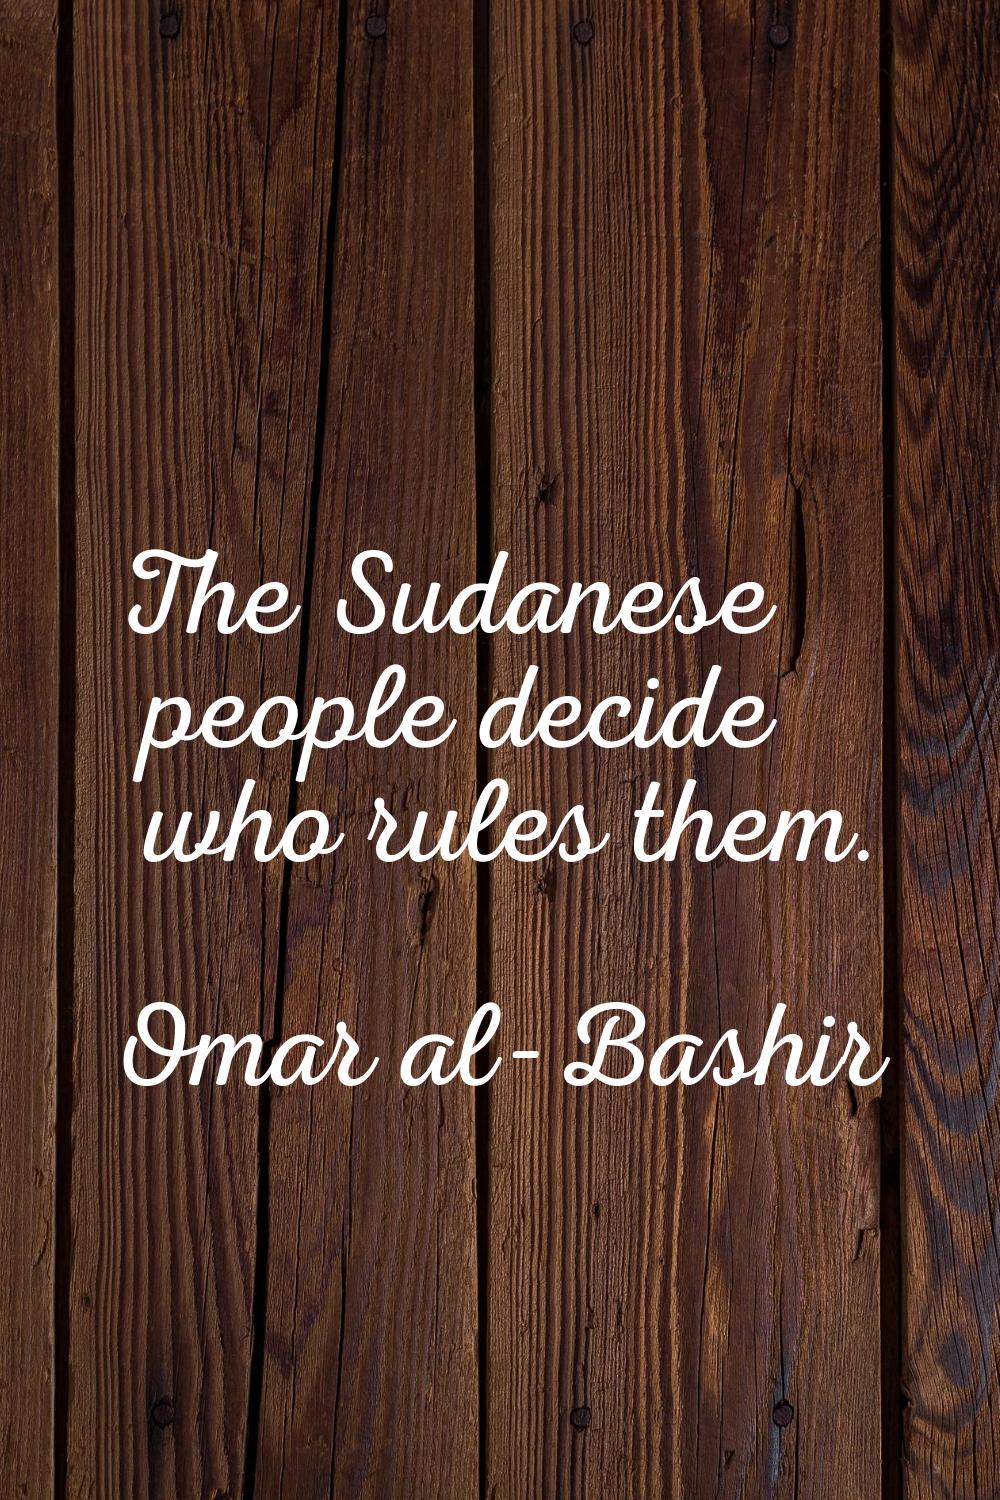 The Sudanese people decide who rules them.